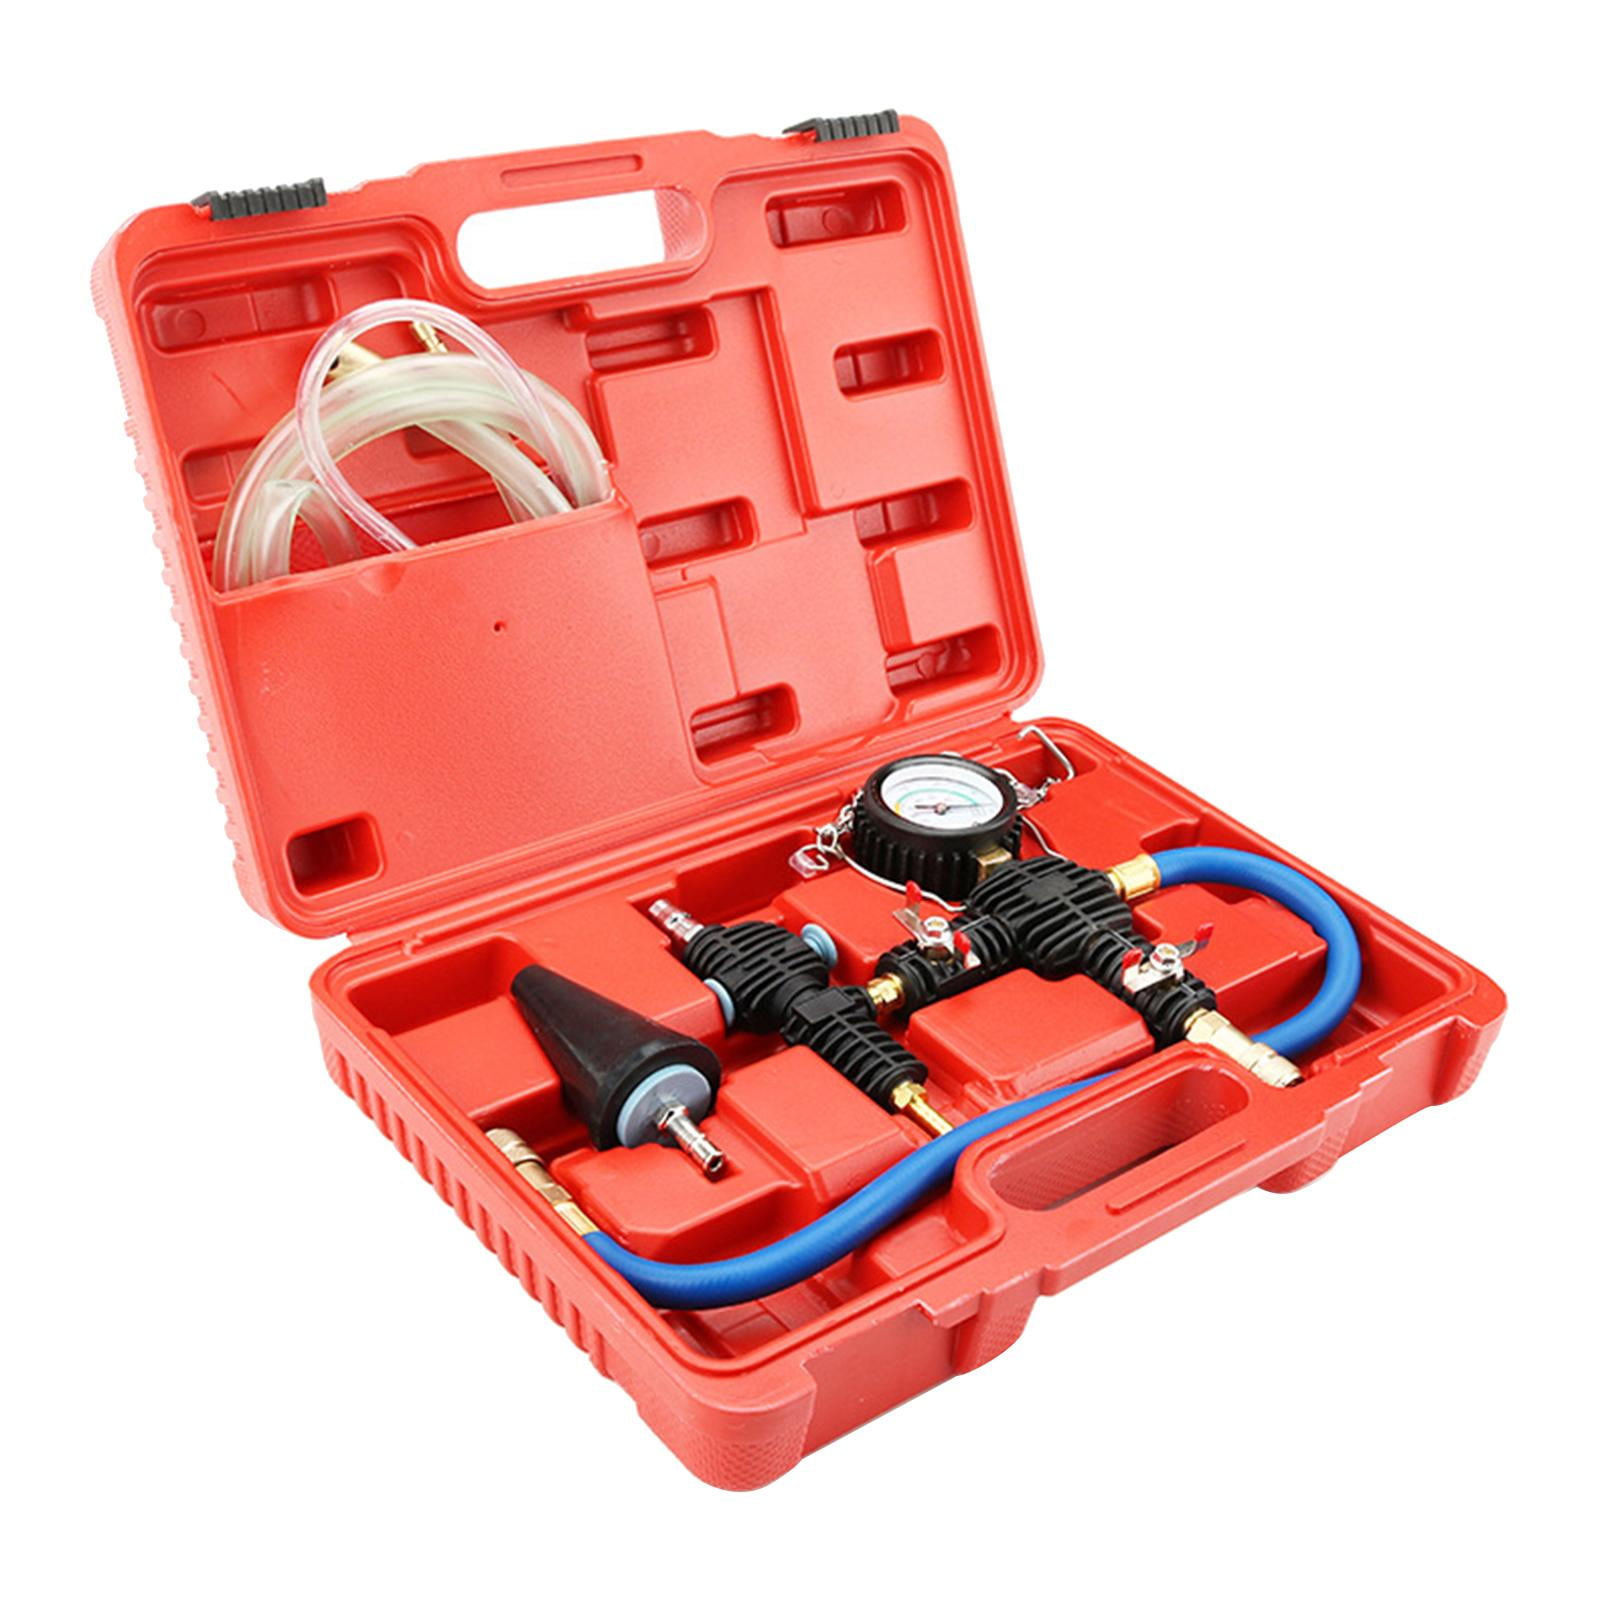 Car Radiator Coolant System Vacuum Purge & Coolant Refill Tool Kit Water Antifreeze Changer Tool Set with Storage Case Universal Cooling System Tester 